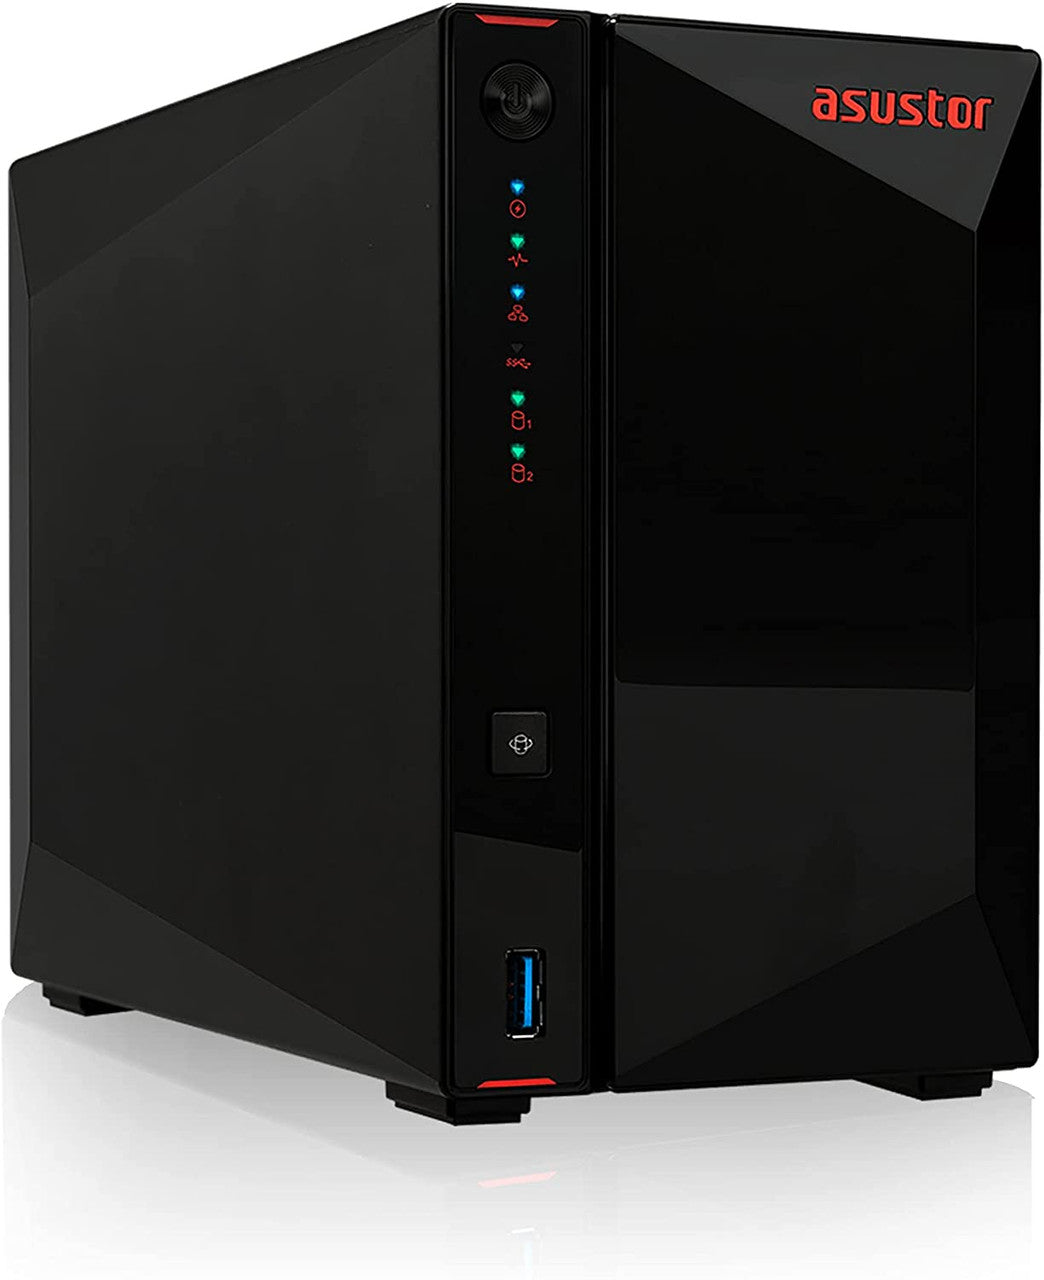 Asustor AS5202T 2-Bay Nimbustor 2 NAS with 8GB RAM and 44TB (2 x 22TB) Western Digital RED PRO Drives Fully Assembled and Tested